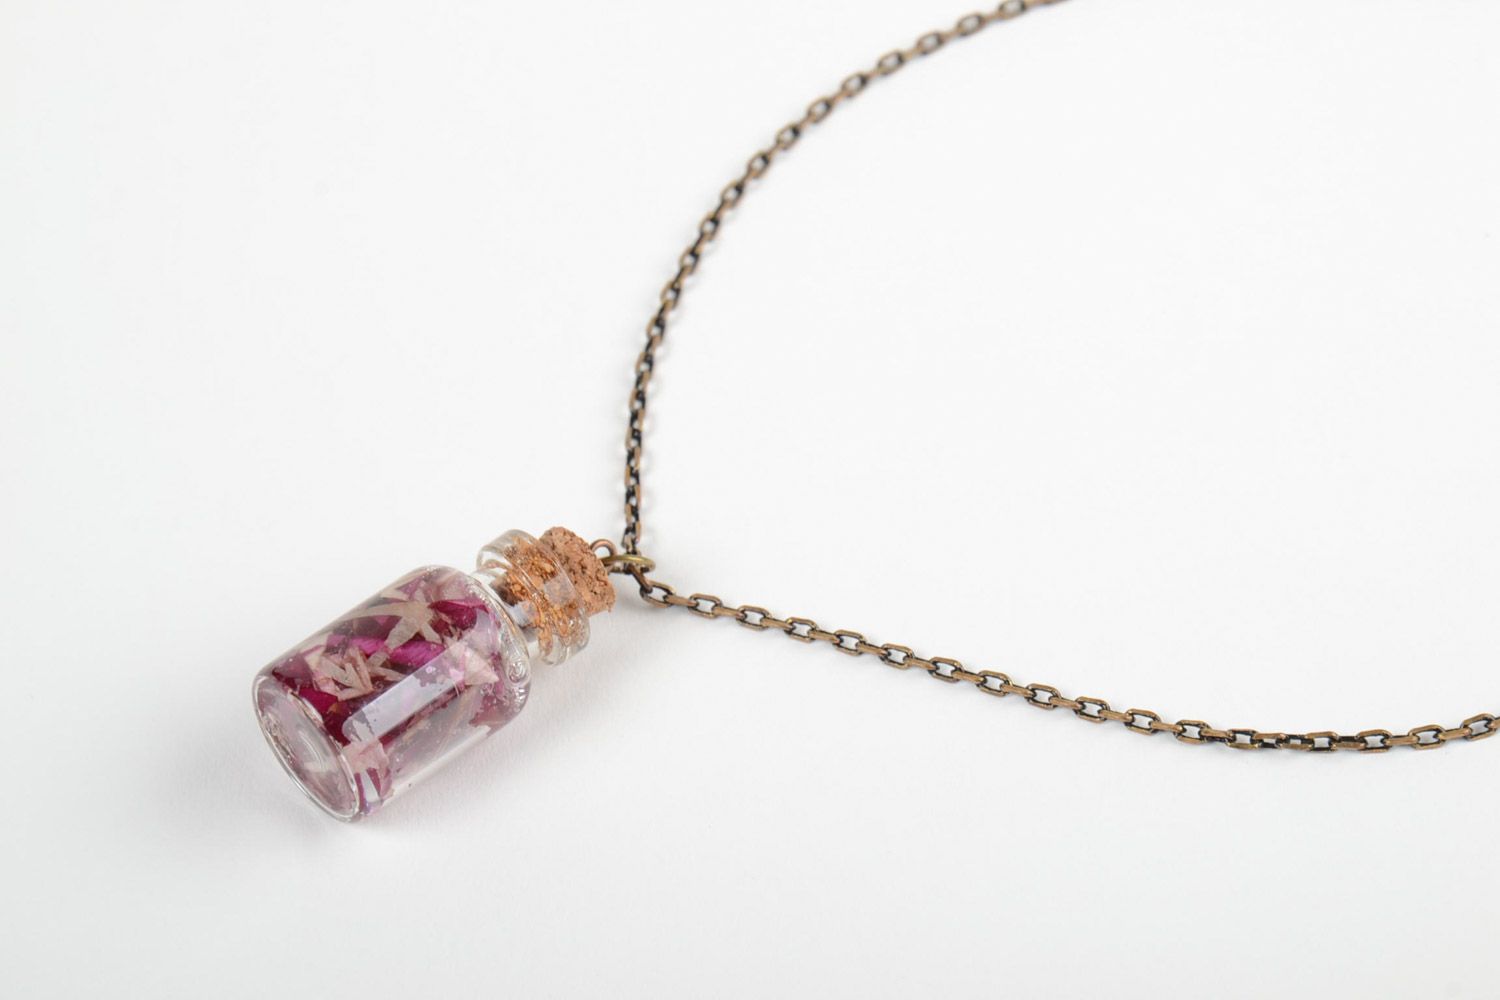 Handmade epoxy resin neck pendant with real flowers inside in the shape of transparent vial photo 3